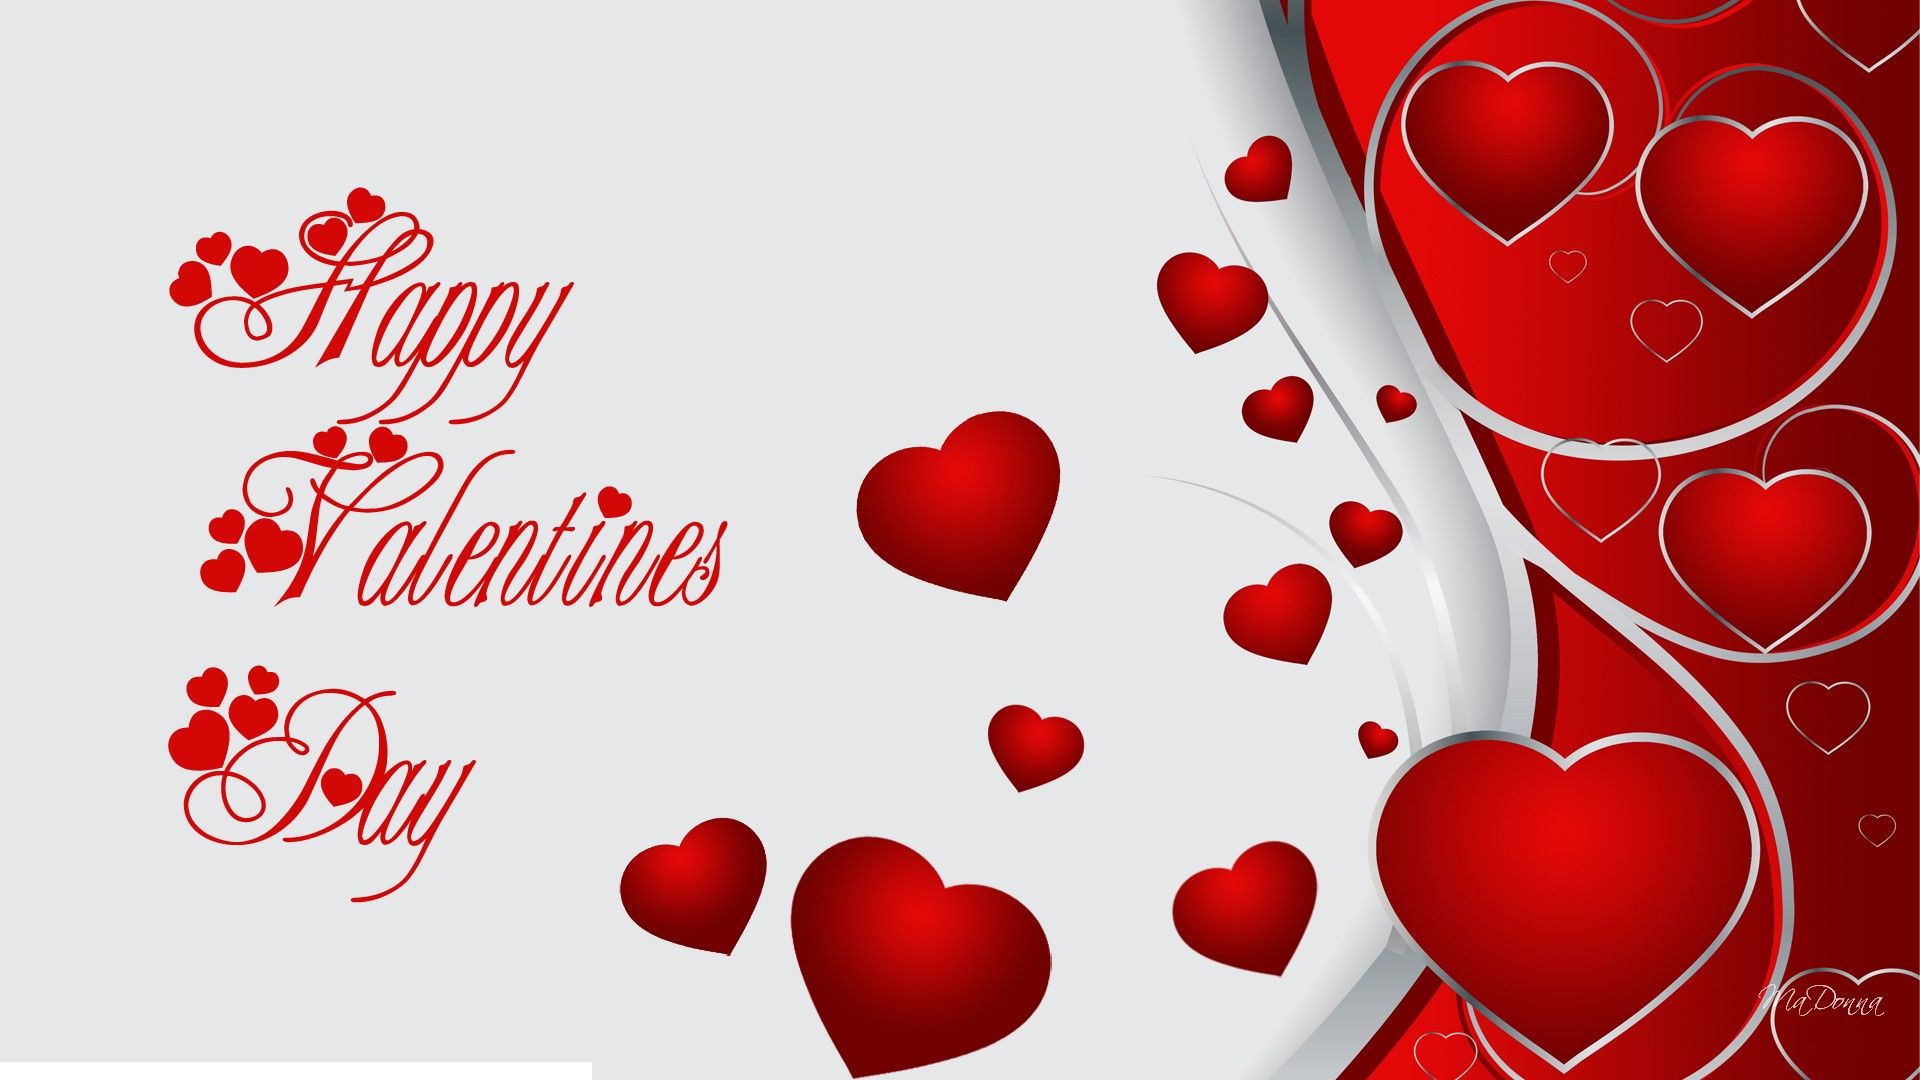 Happy Valentines Day Wallpapers HD 2016 Wallpapers, Backgrounds